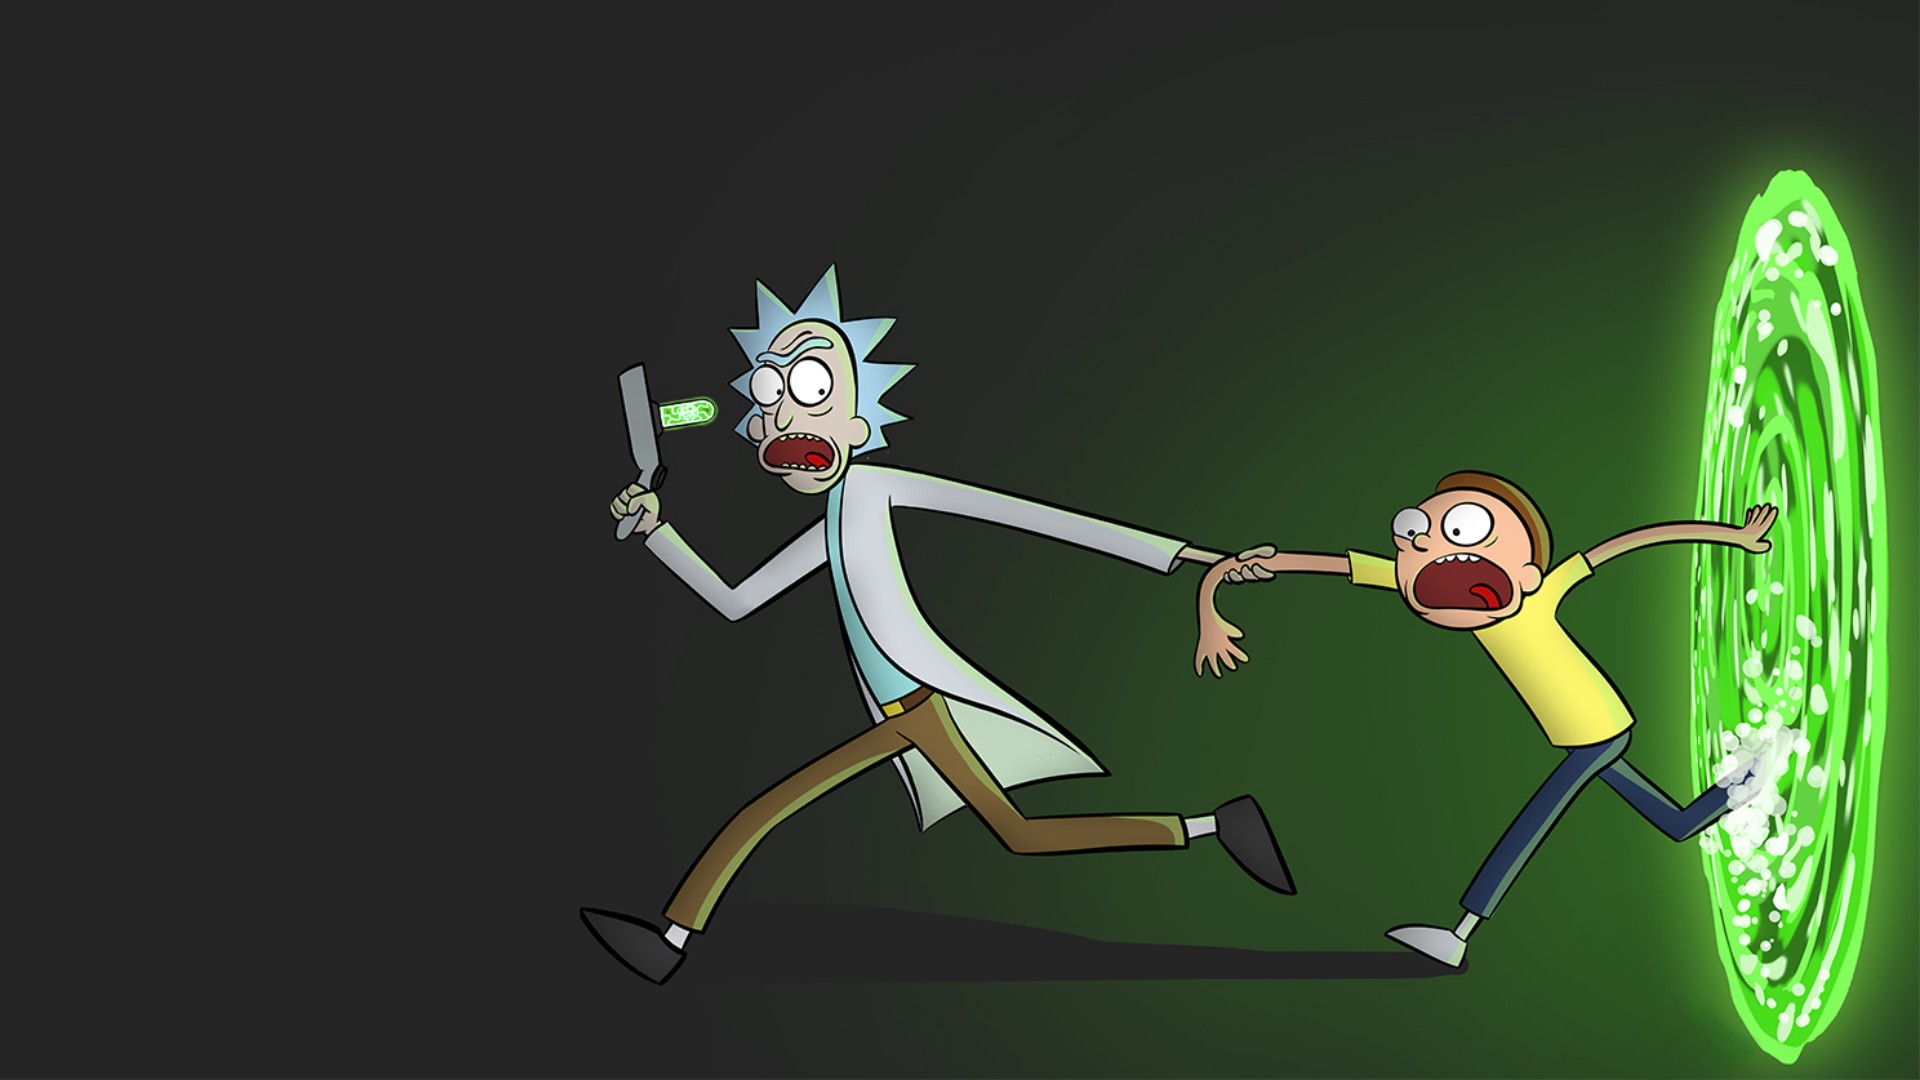 rick sanchez morty smith rick and morty tv wallpapers hd desktop and mobile backgrounds rick sanchez morty smith rick and